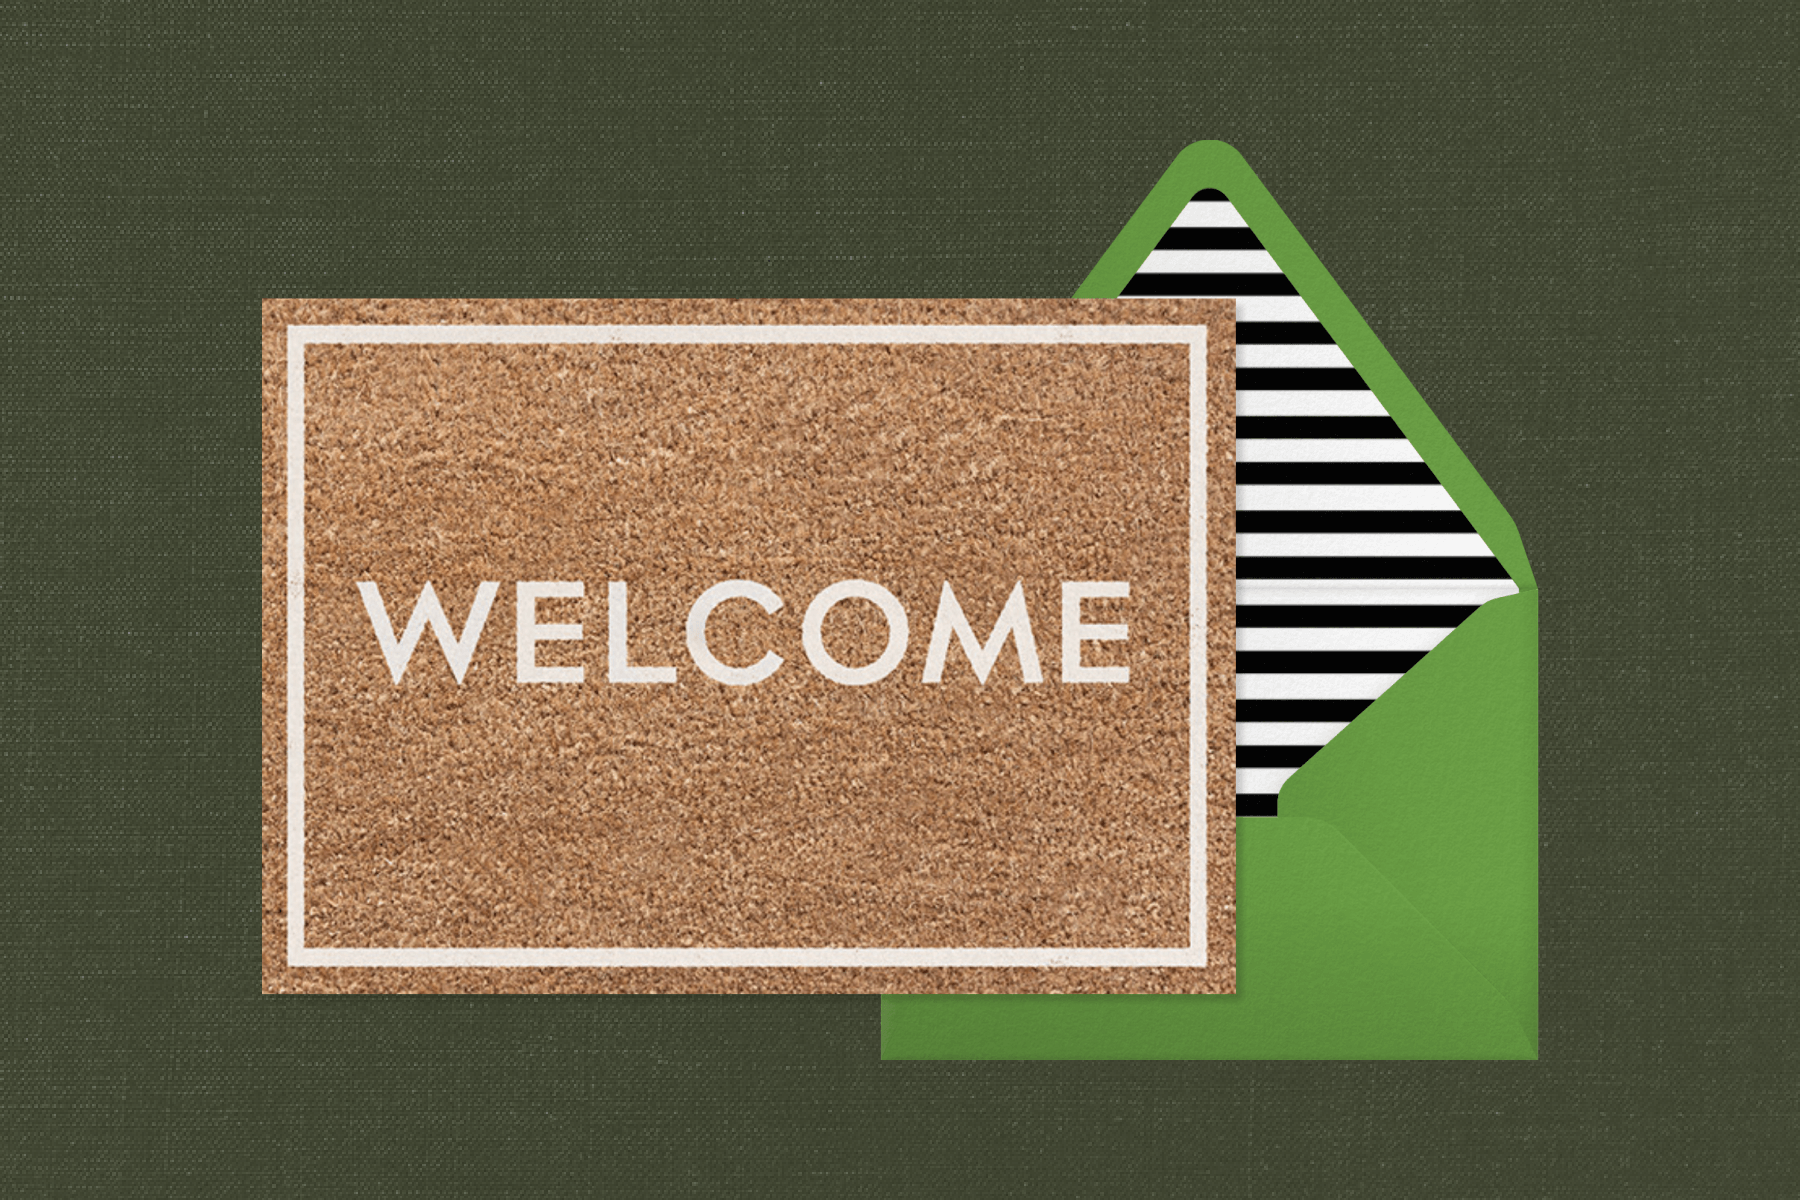 A card that resembles a coir doormat with the word “Welcome” in white block letters, beside a green envelope with black and white striped liner.